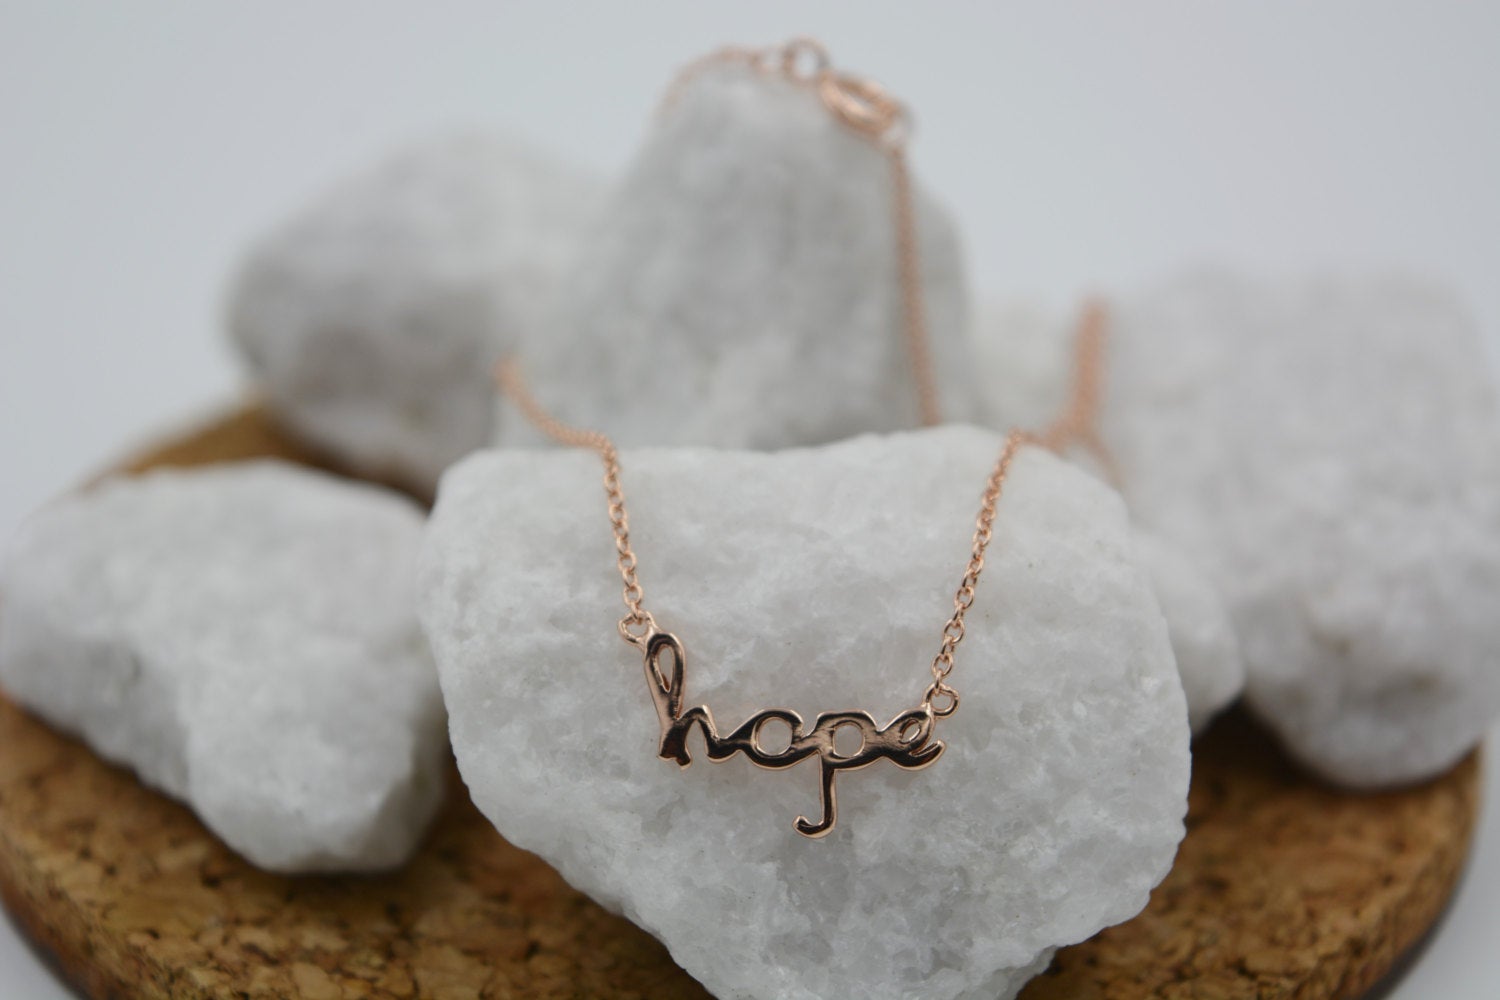 Hope Necklace in Rose Gold